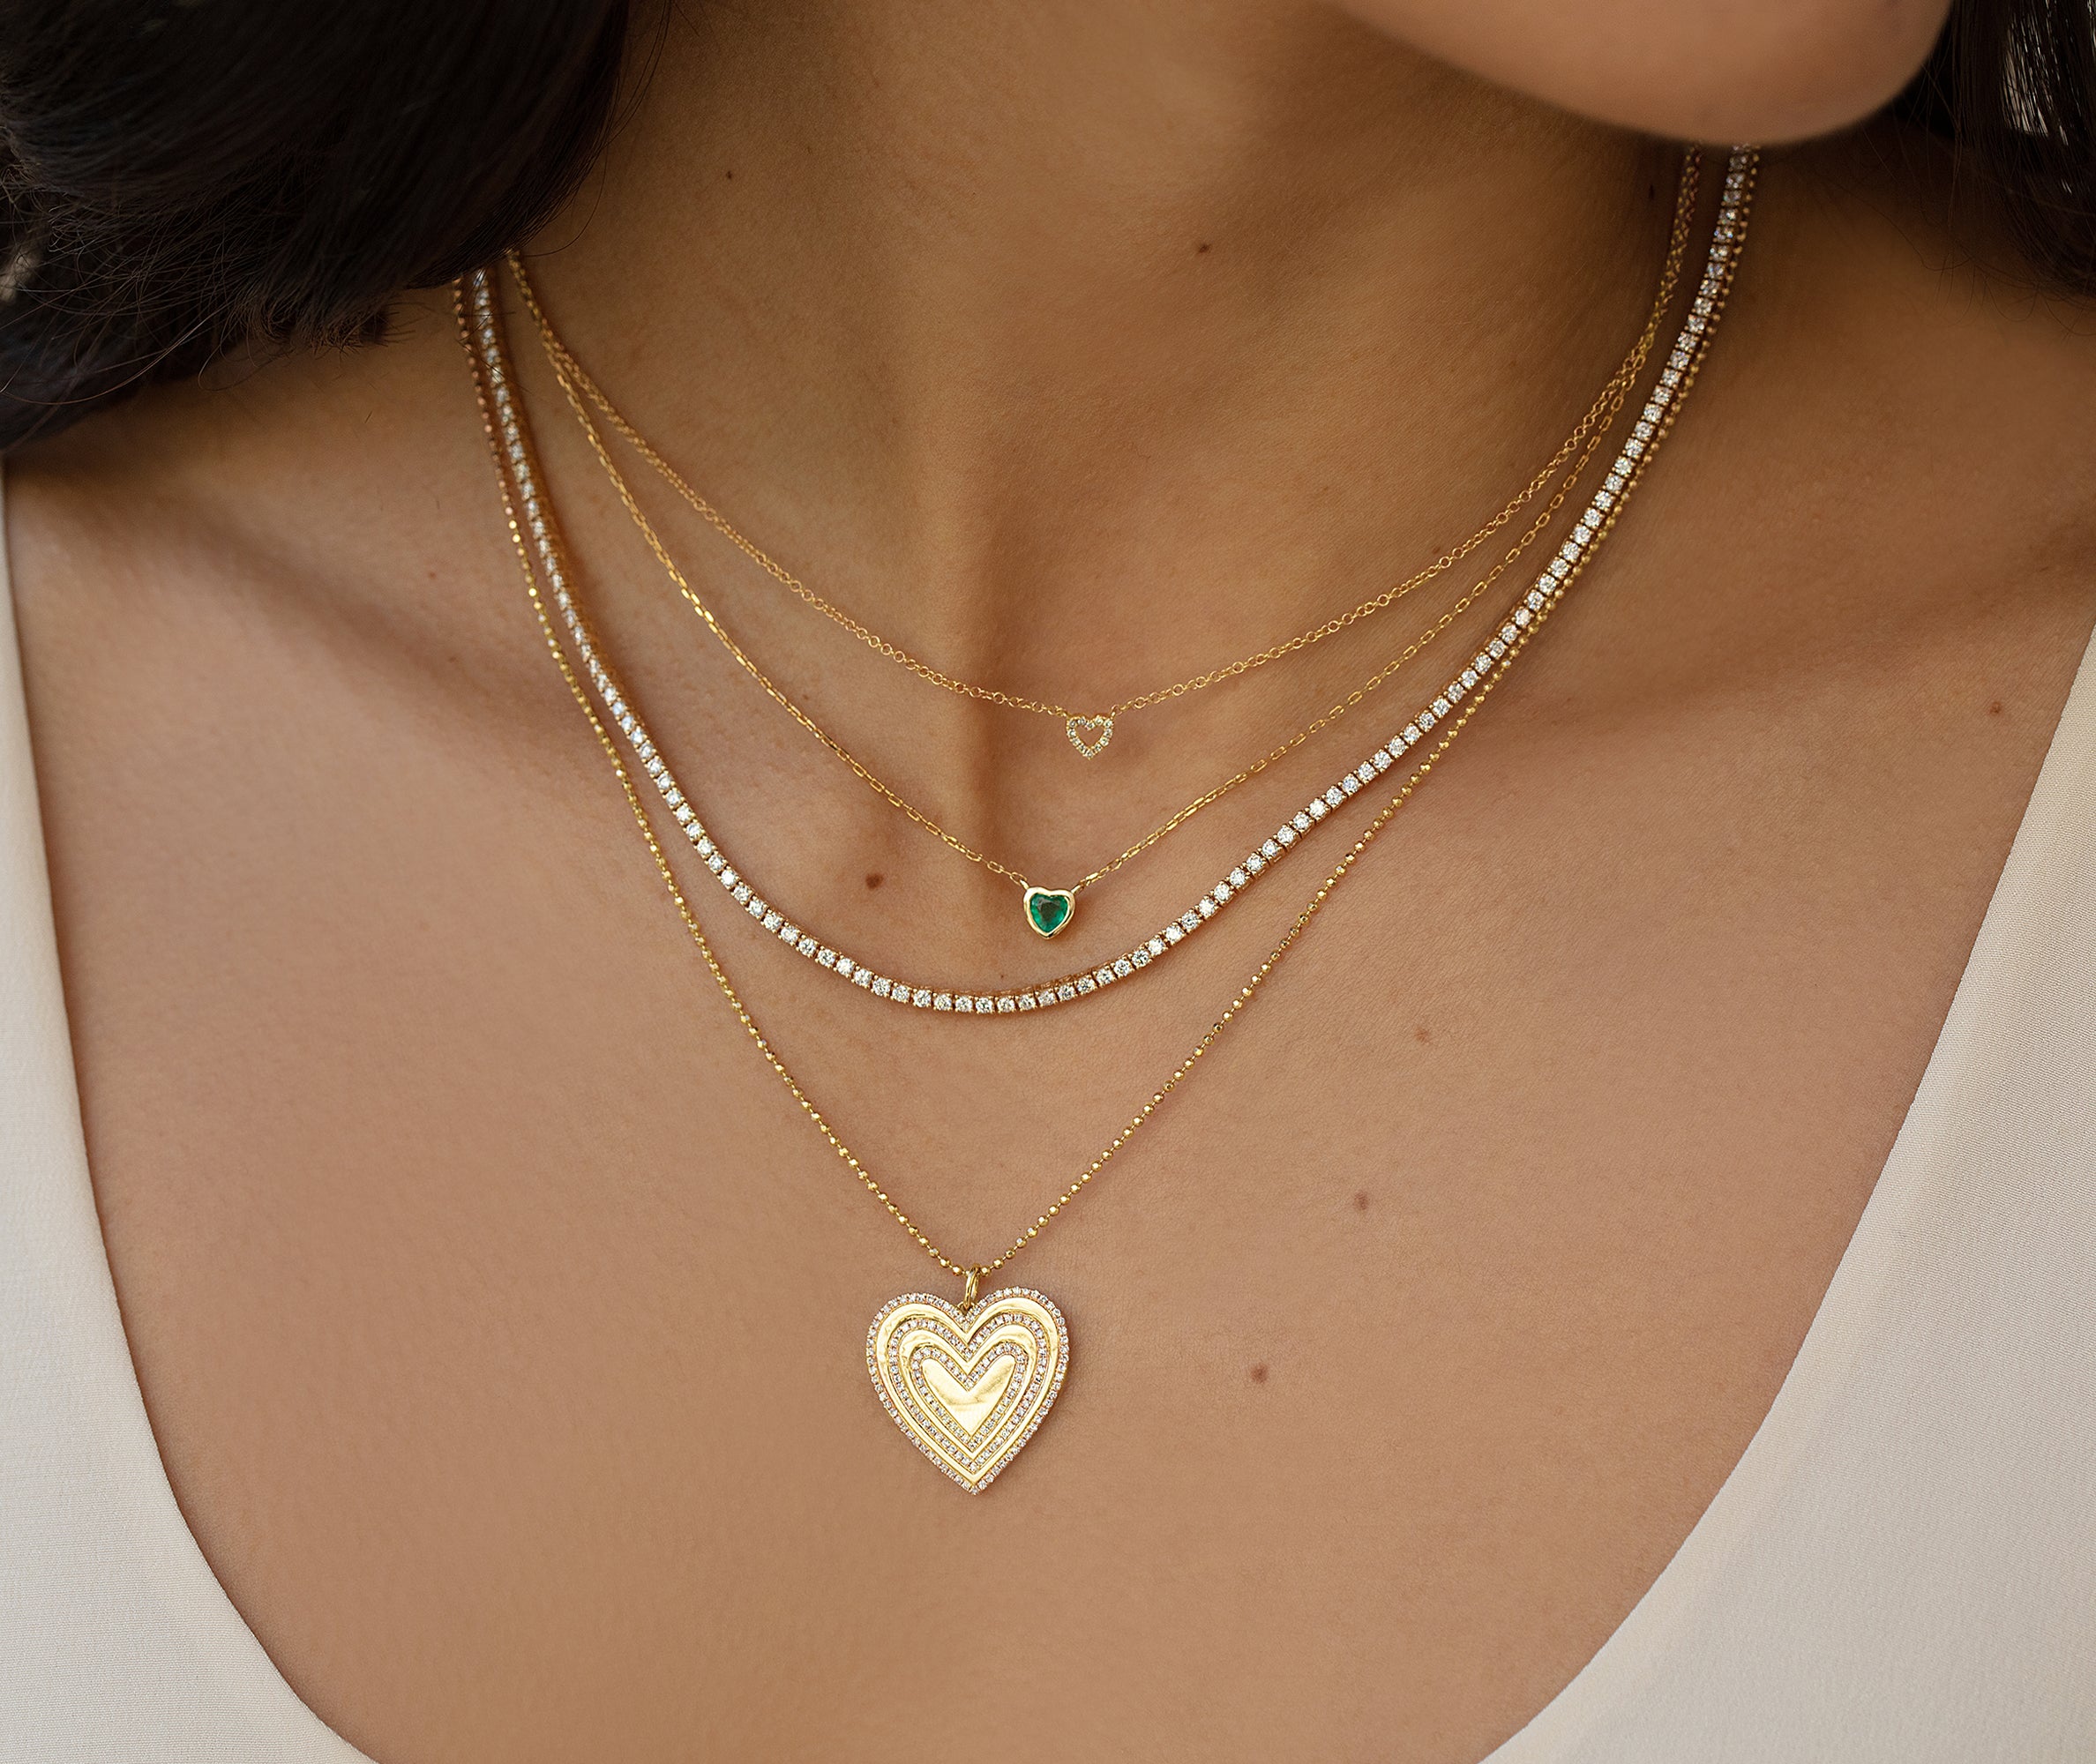 14k yellow gold chain necklace with fixed 5.6mm emerald jewel heart pendant styled on model with layered necklaces